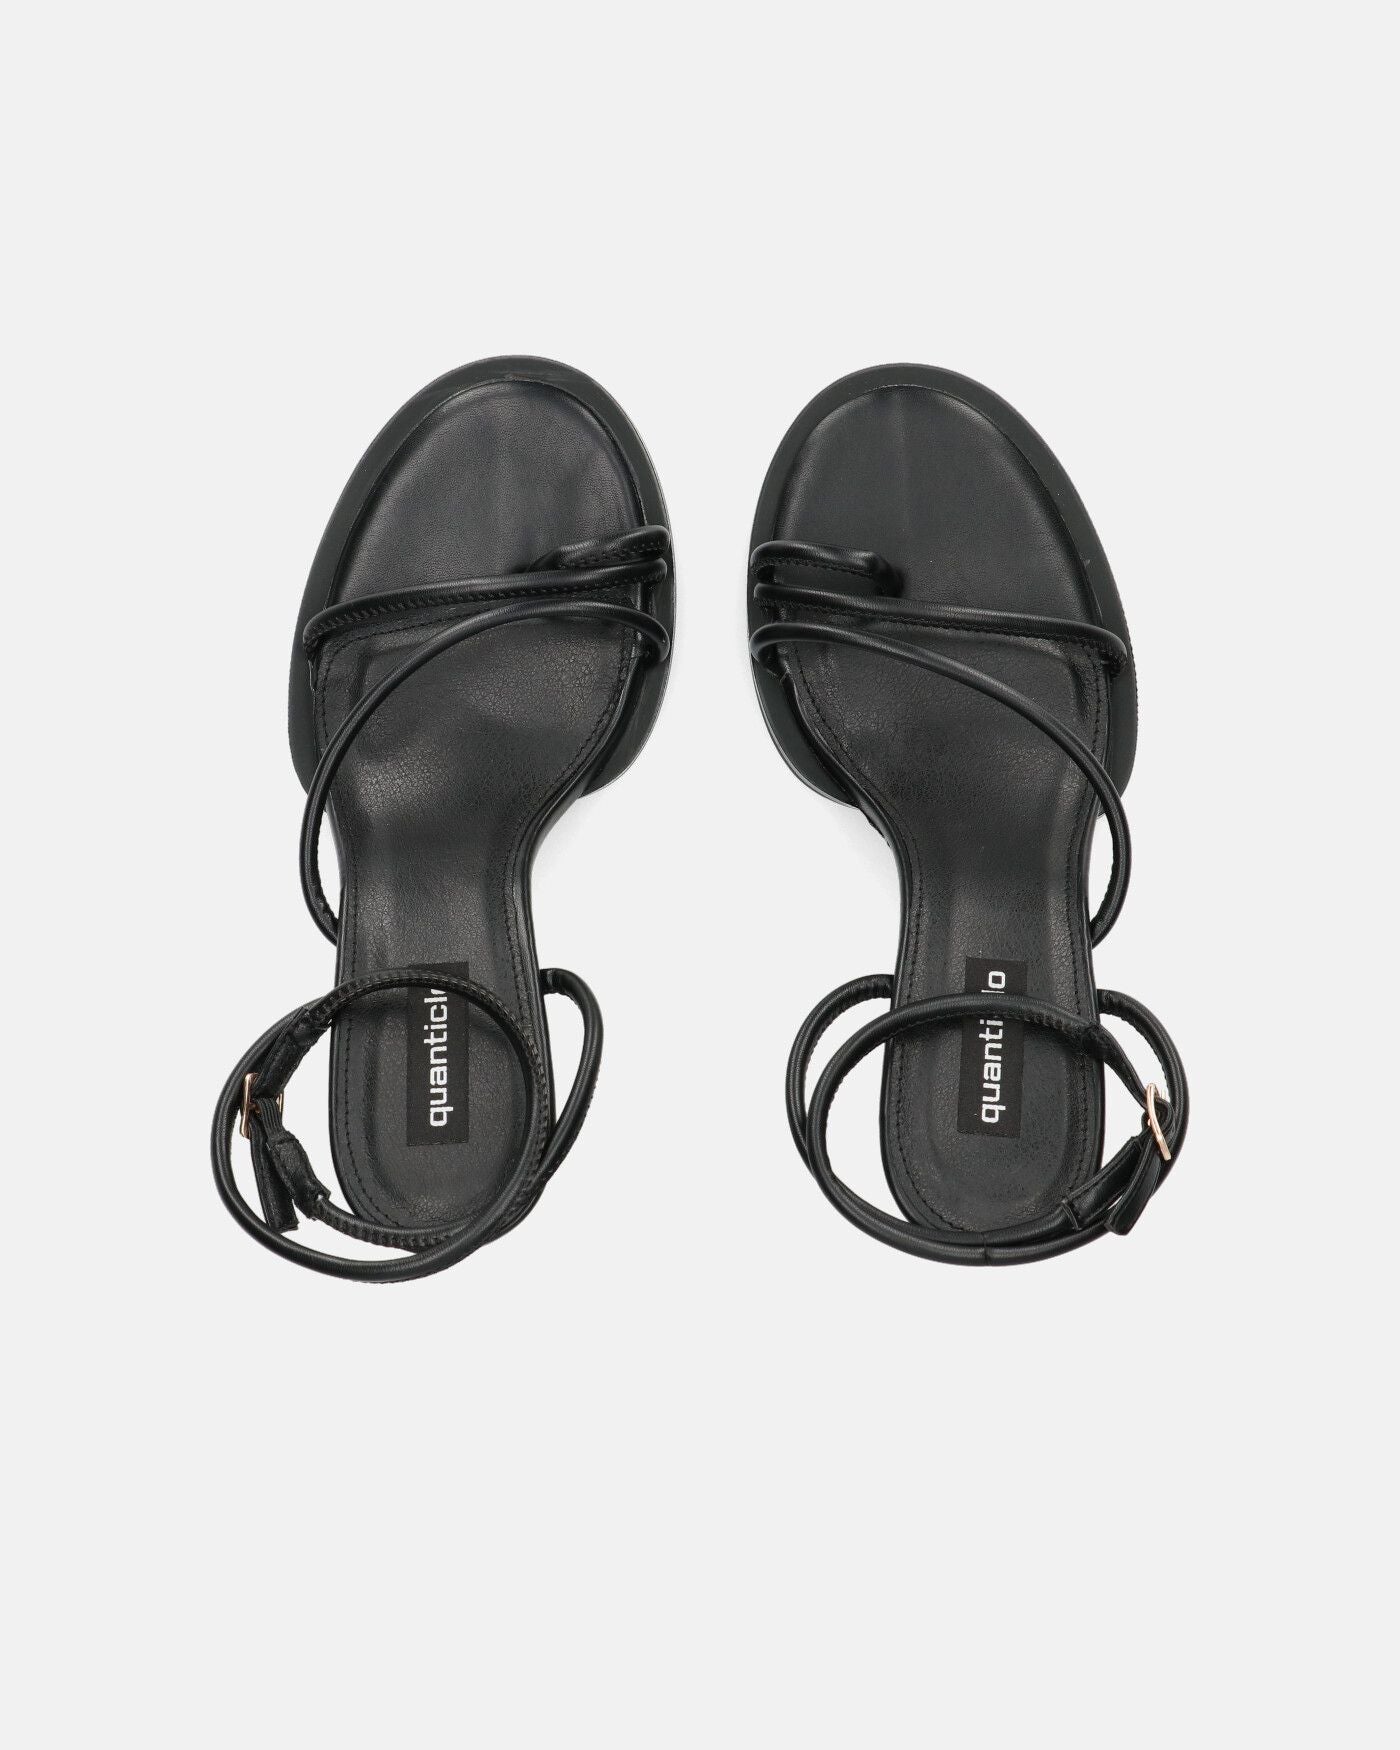 TUULA - black faux leather sandals with strap